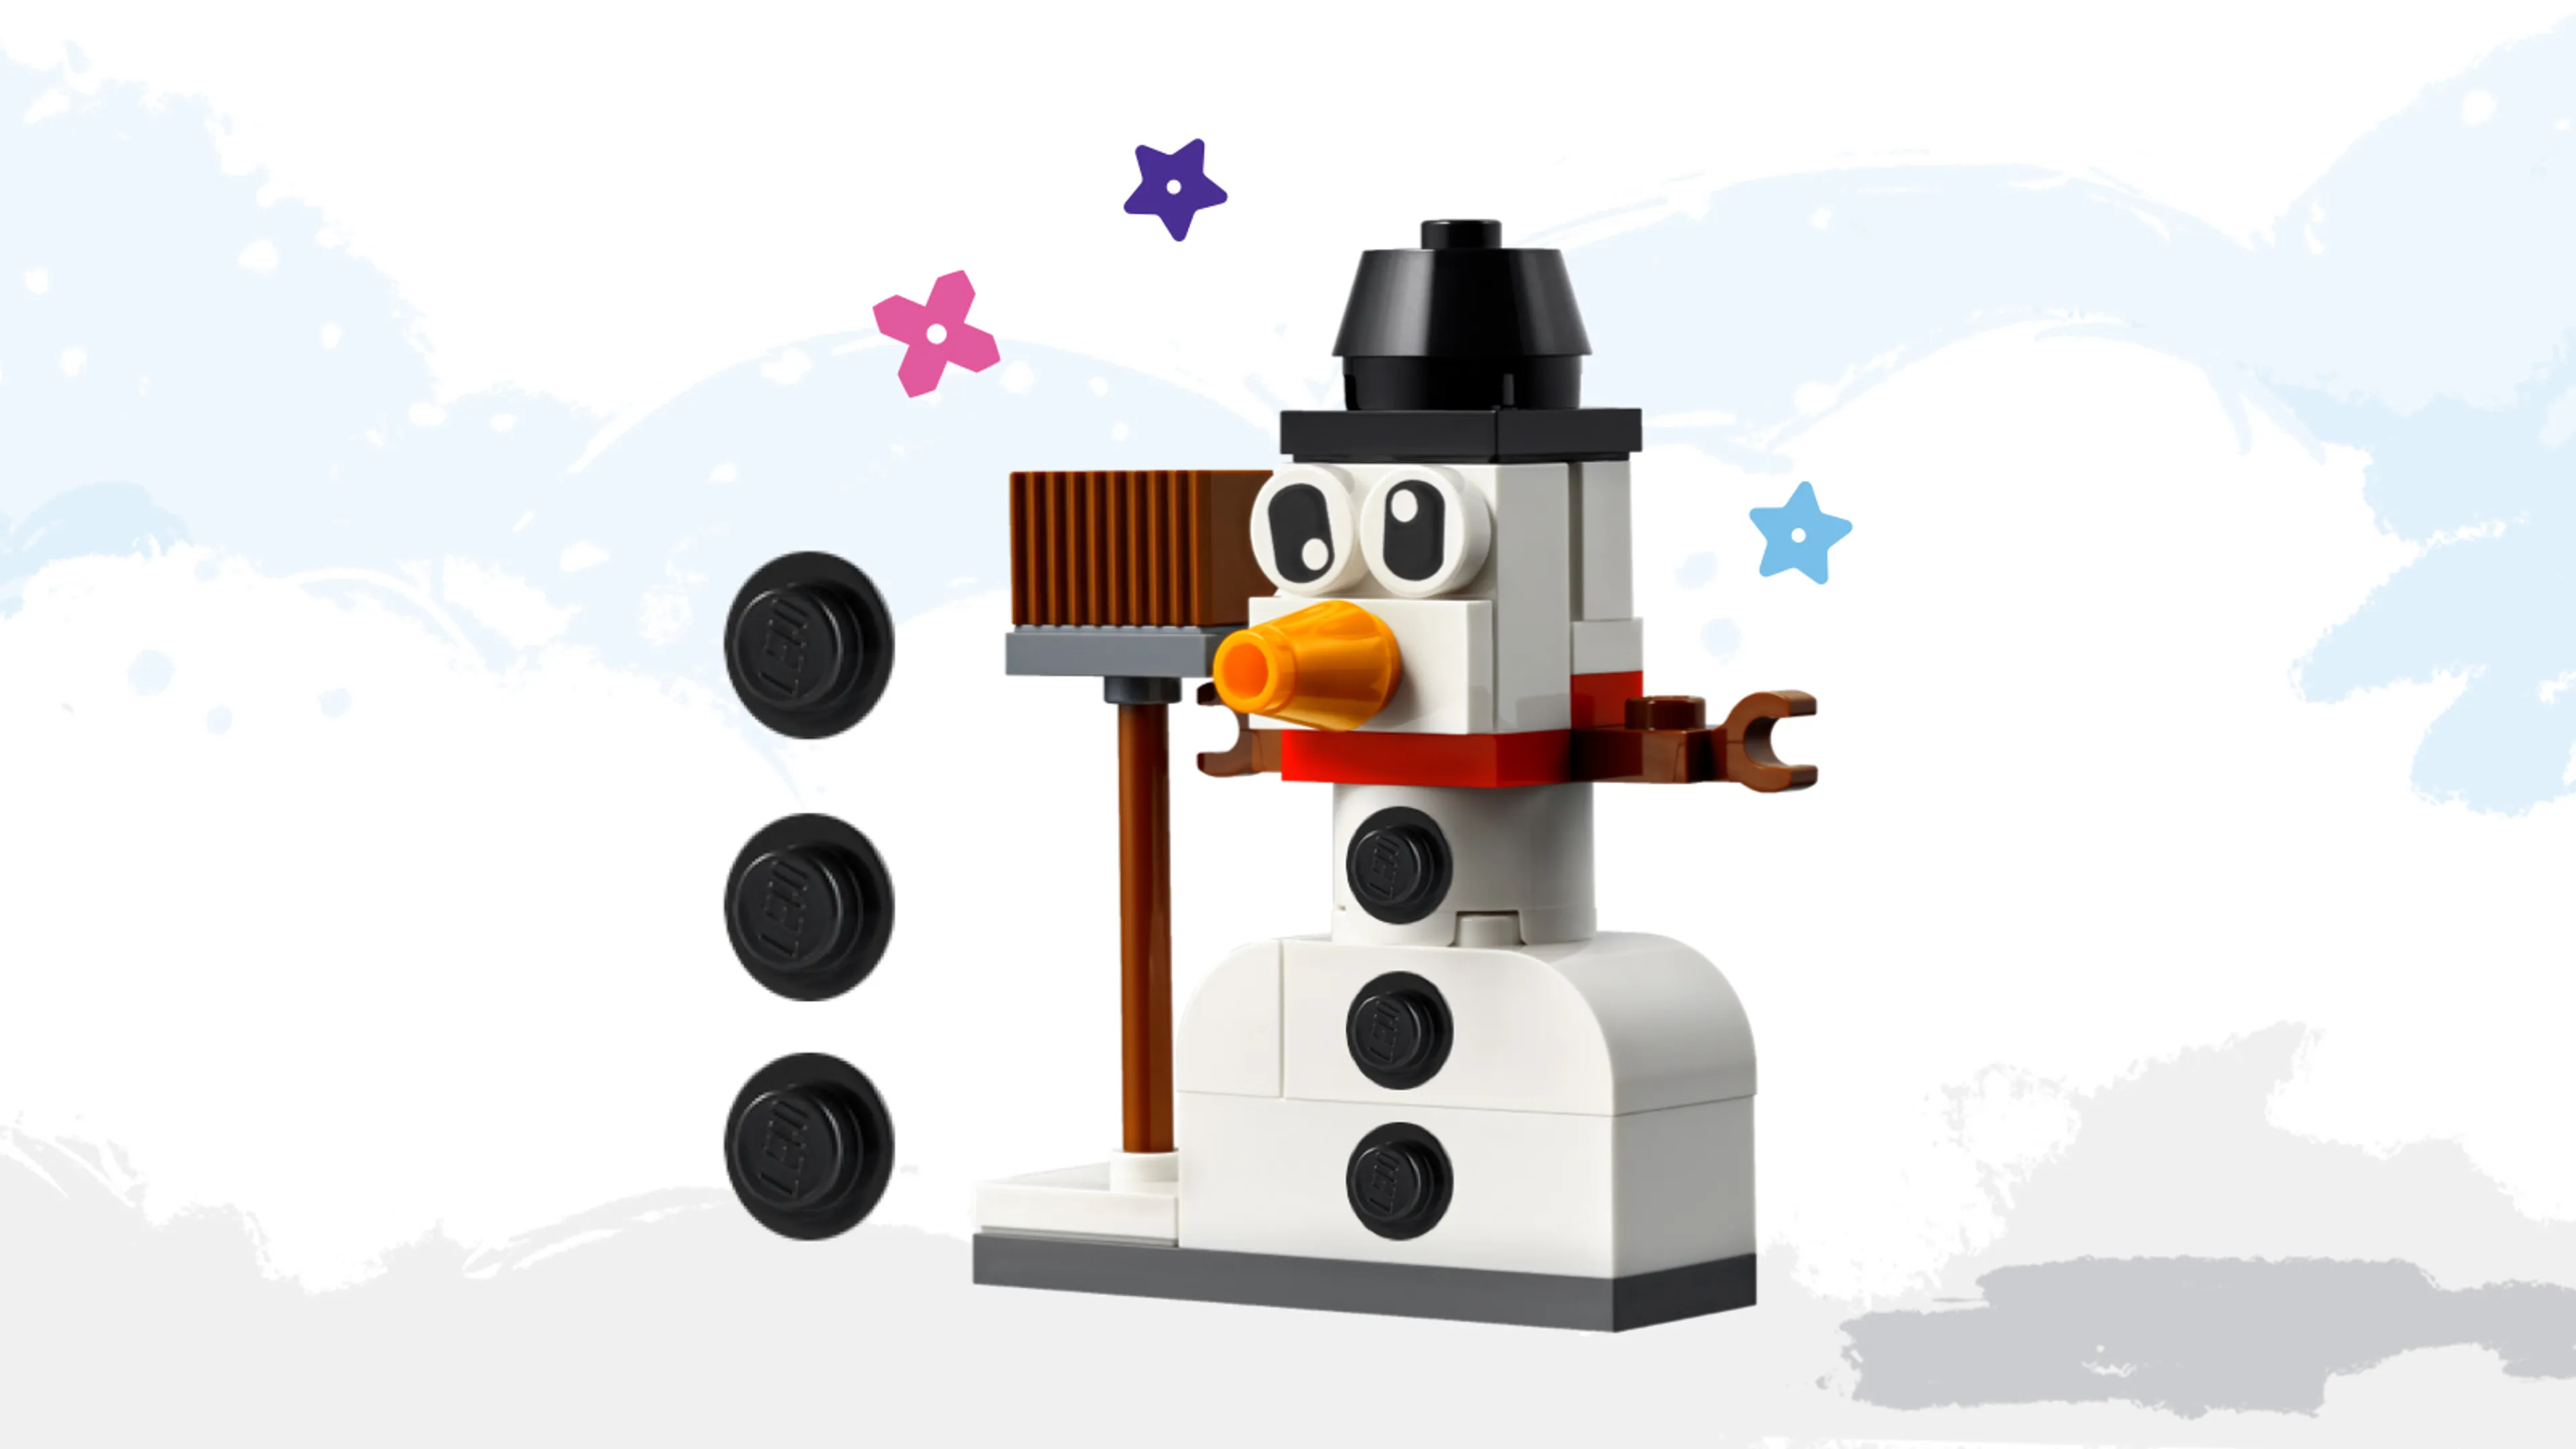 A snowman LEGO build with buttons